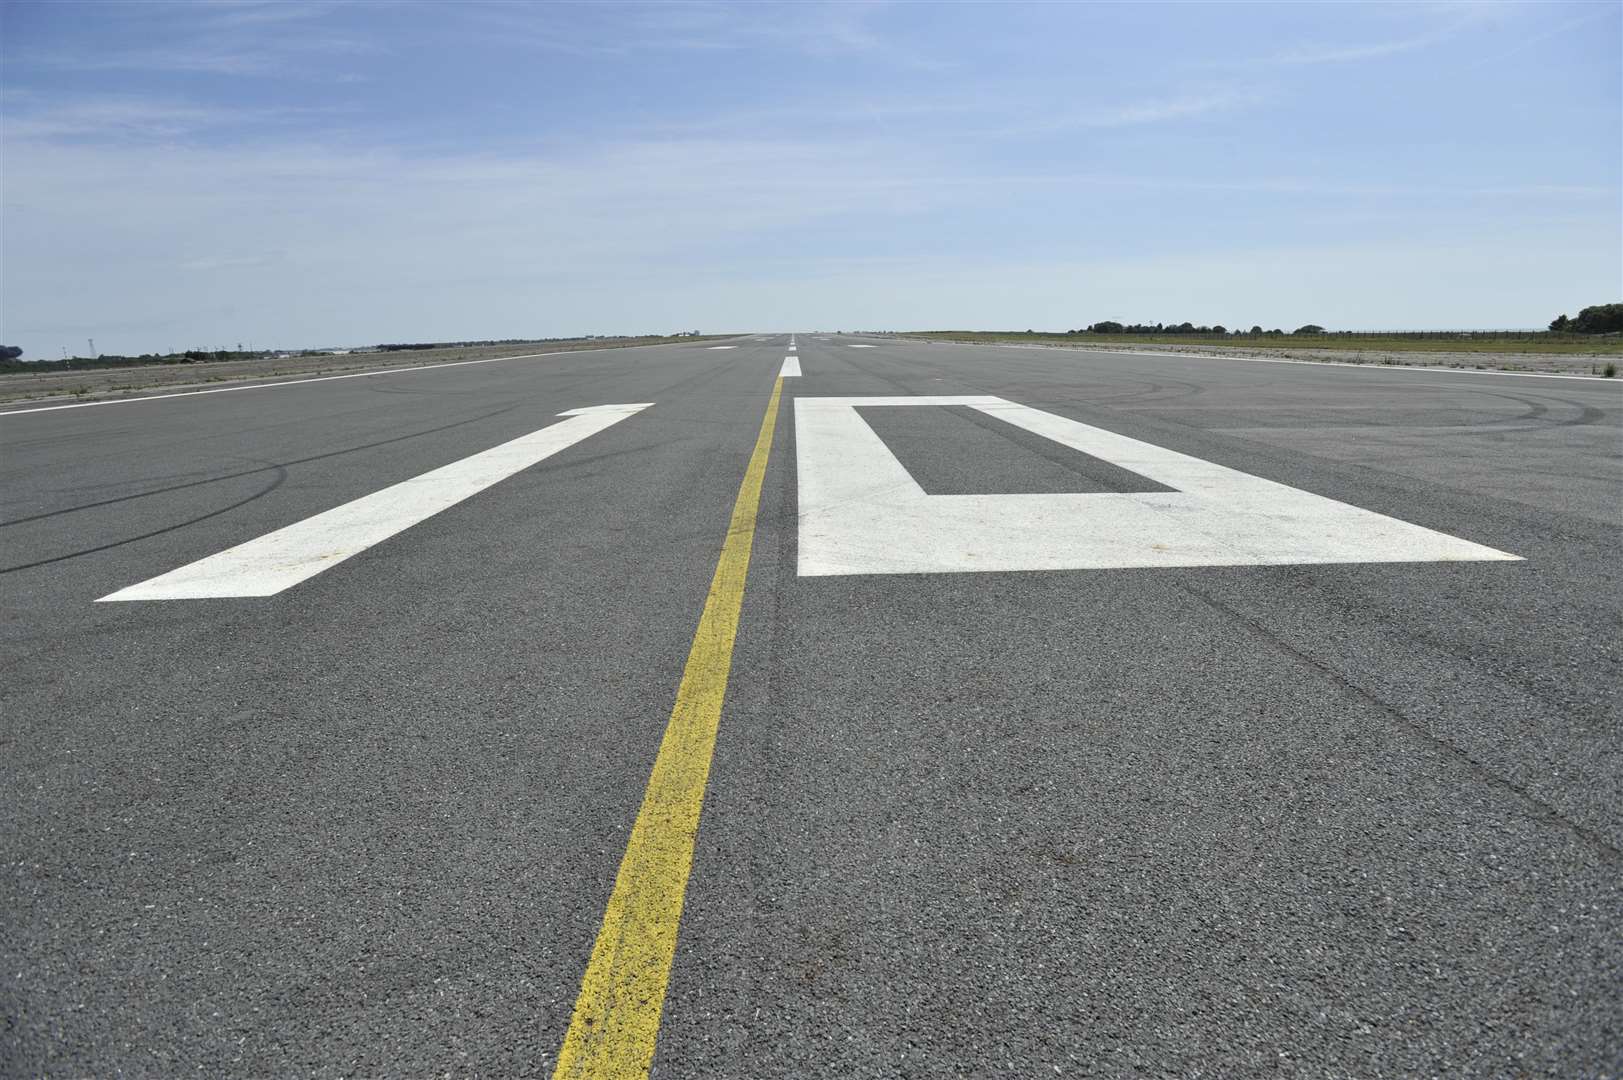 Manston Airport has stood abandoned since it closed in 2014